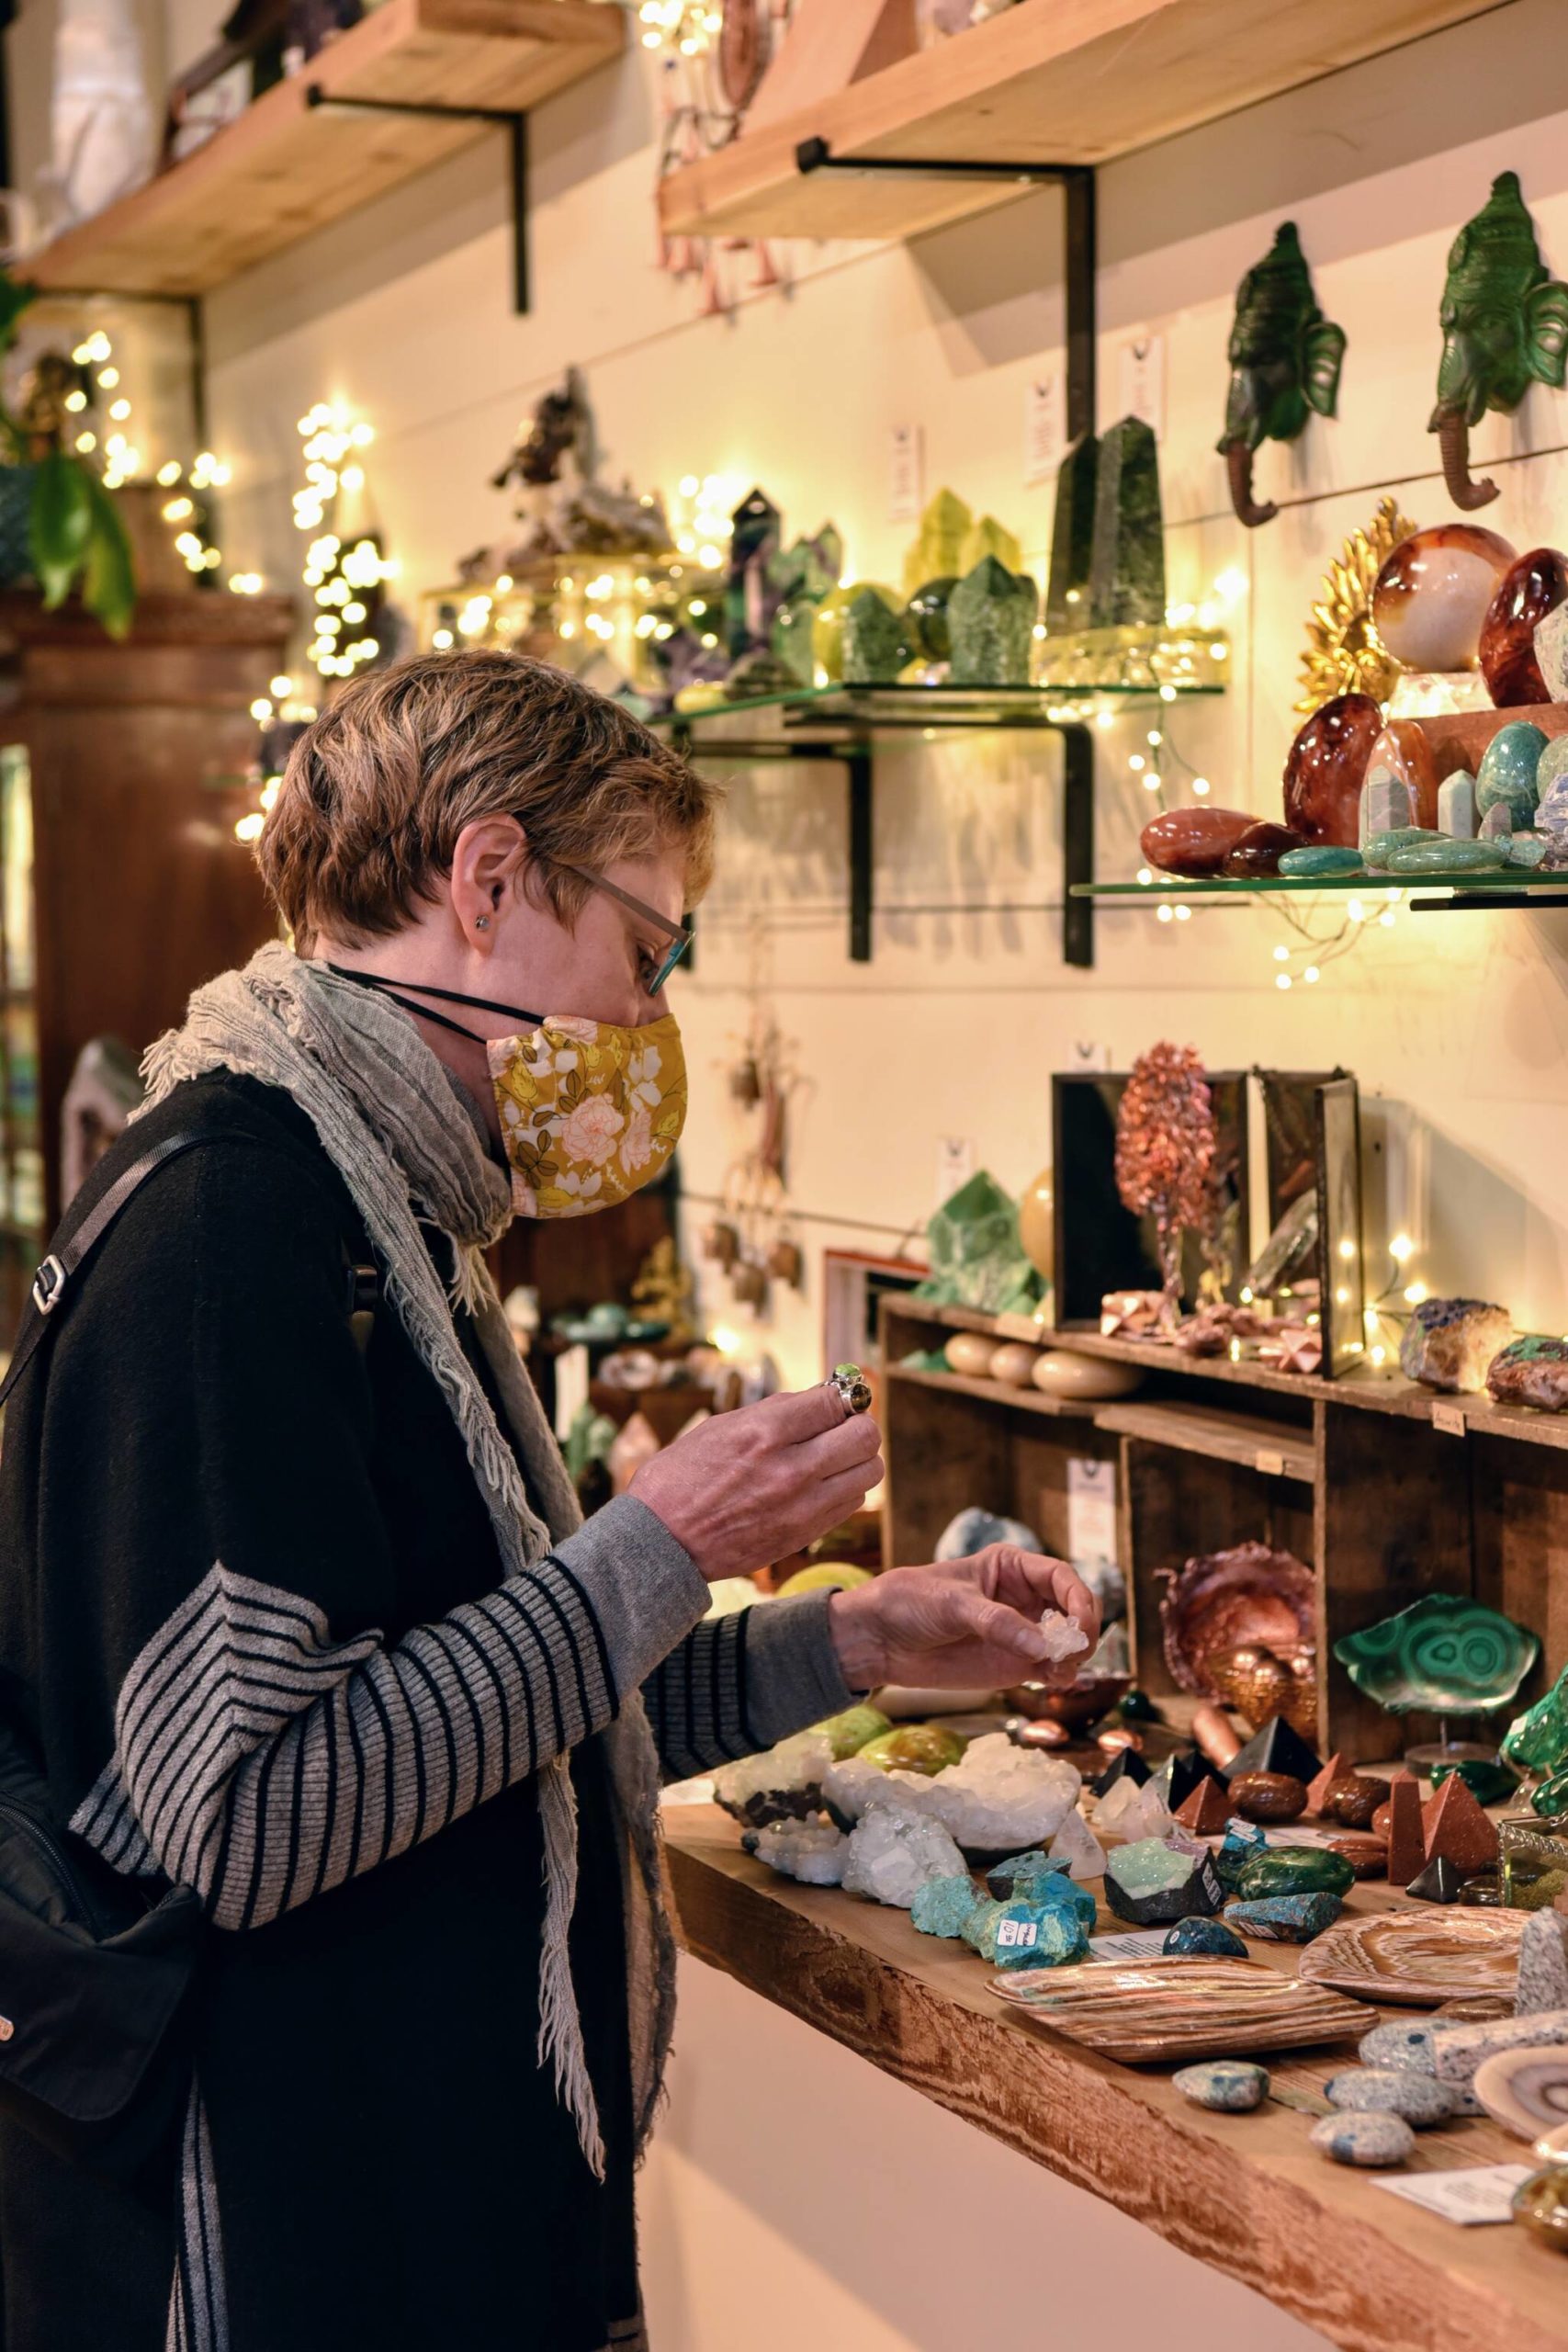 Susan Neal, a writer and executive assistant, takes her time discovering new stones that might resonate with the energy in her life right now. Hidden Gem, located in the Winslow Mall, opened in April earlier this year.